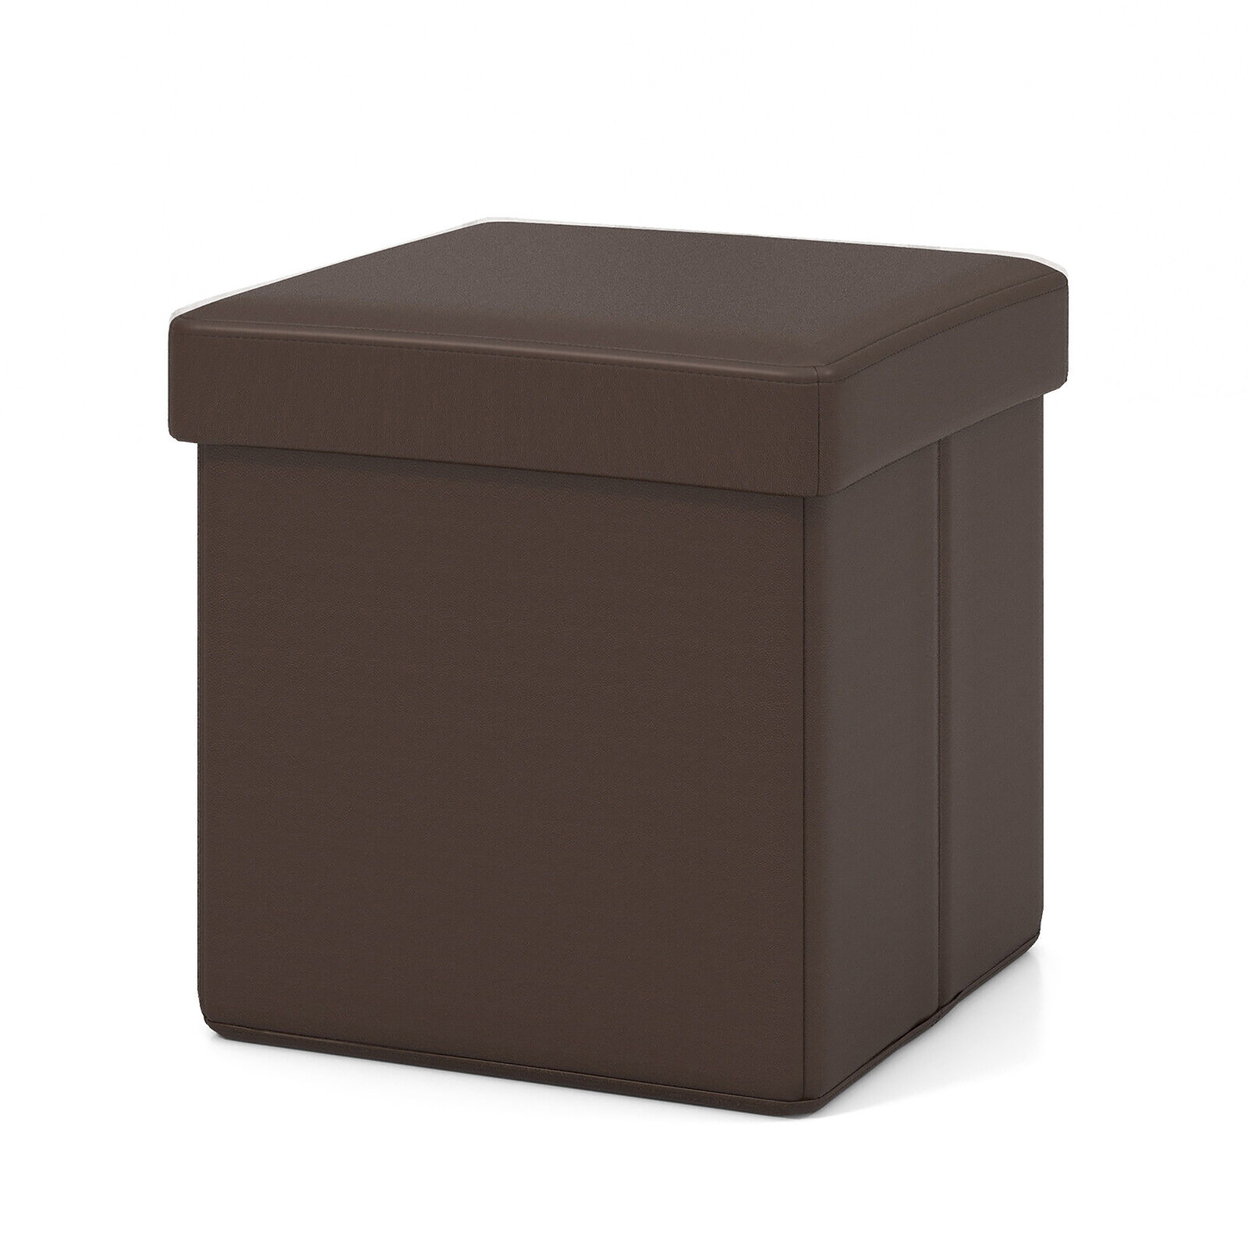 Folding Storage Ottoman Upholstered Square Footstool PVC Leather 10.5 Gallon - Brown